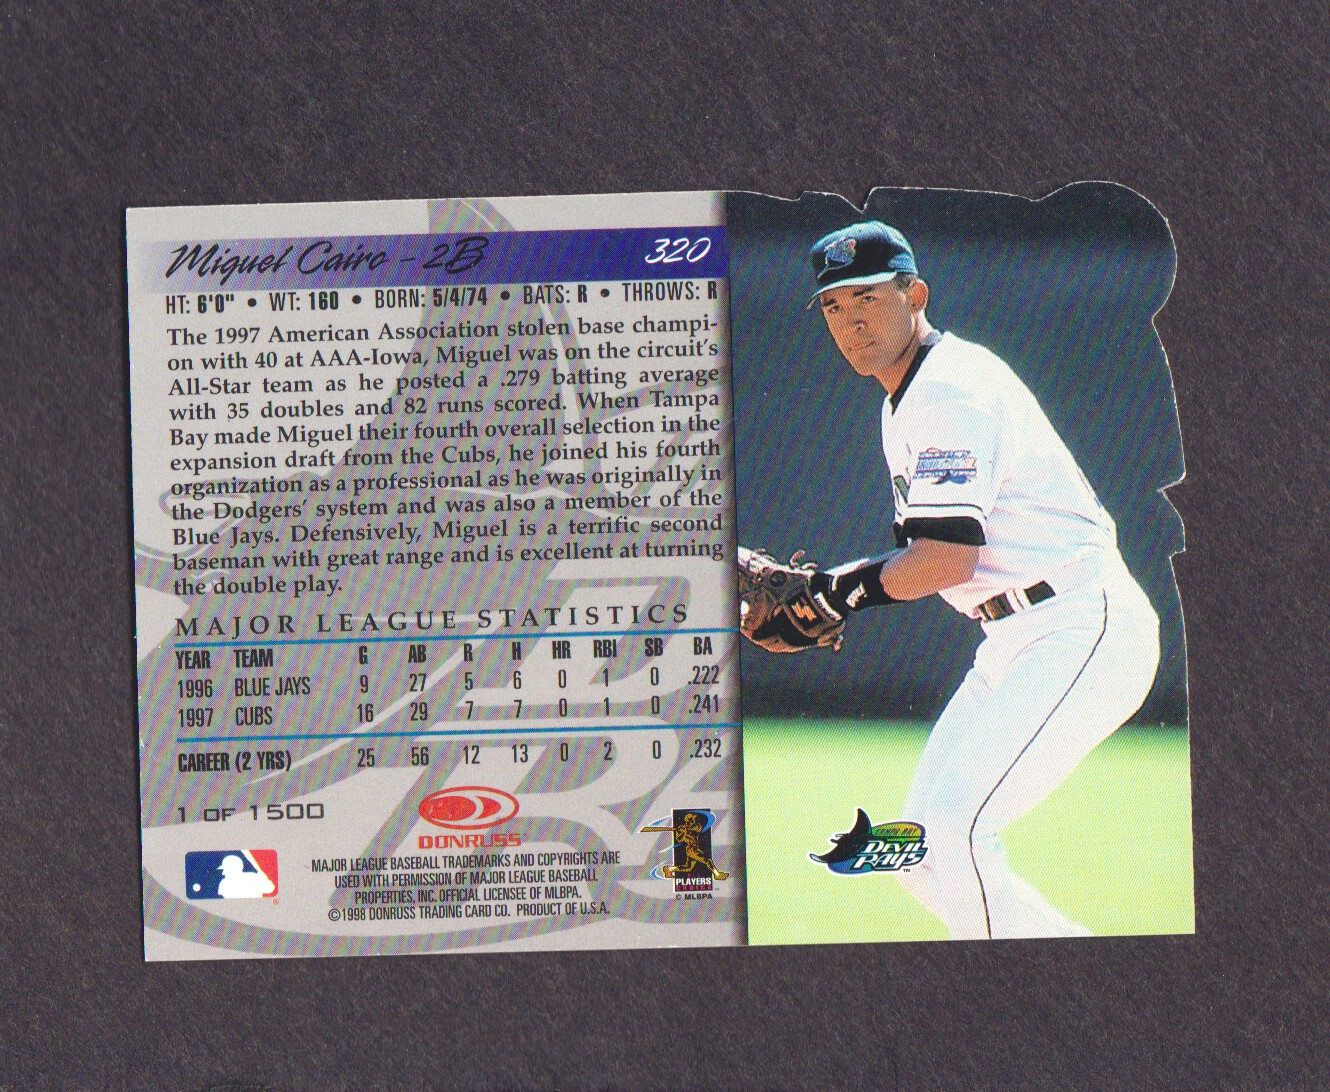 1998 Donruss Silver Press Proofs #320 Miguel Cairo back image